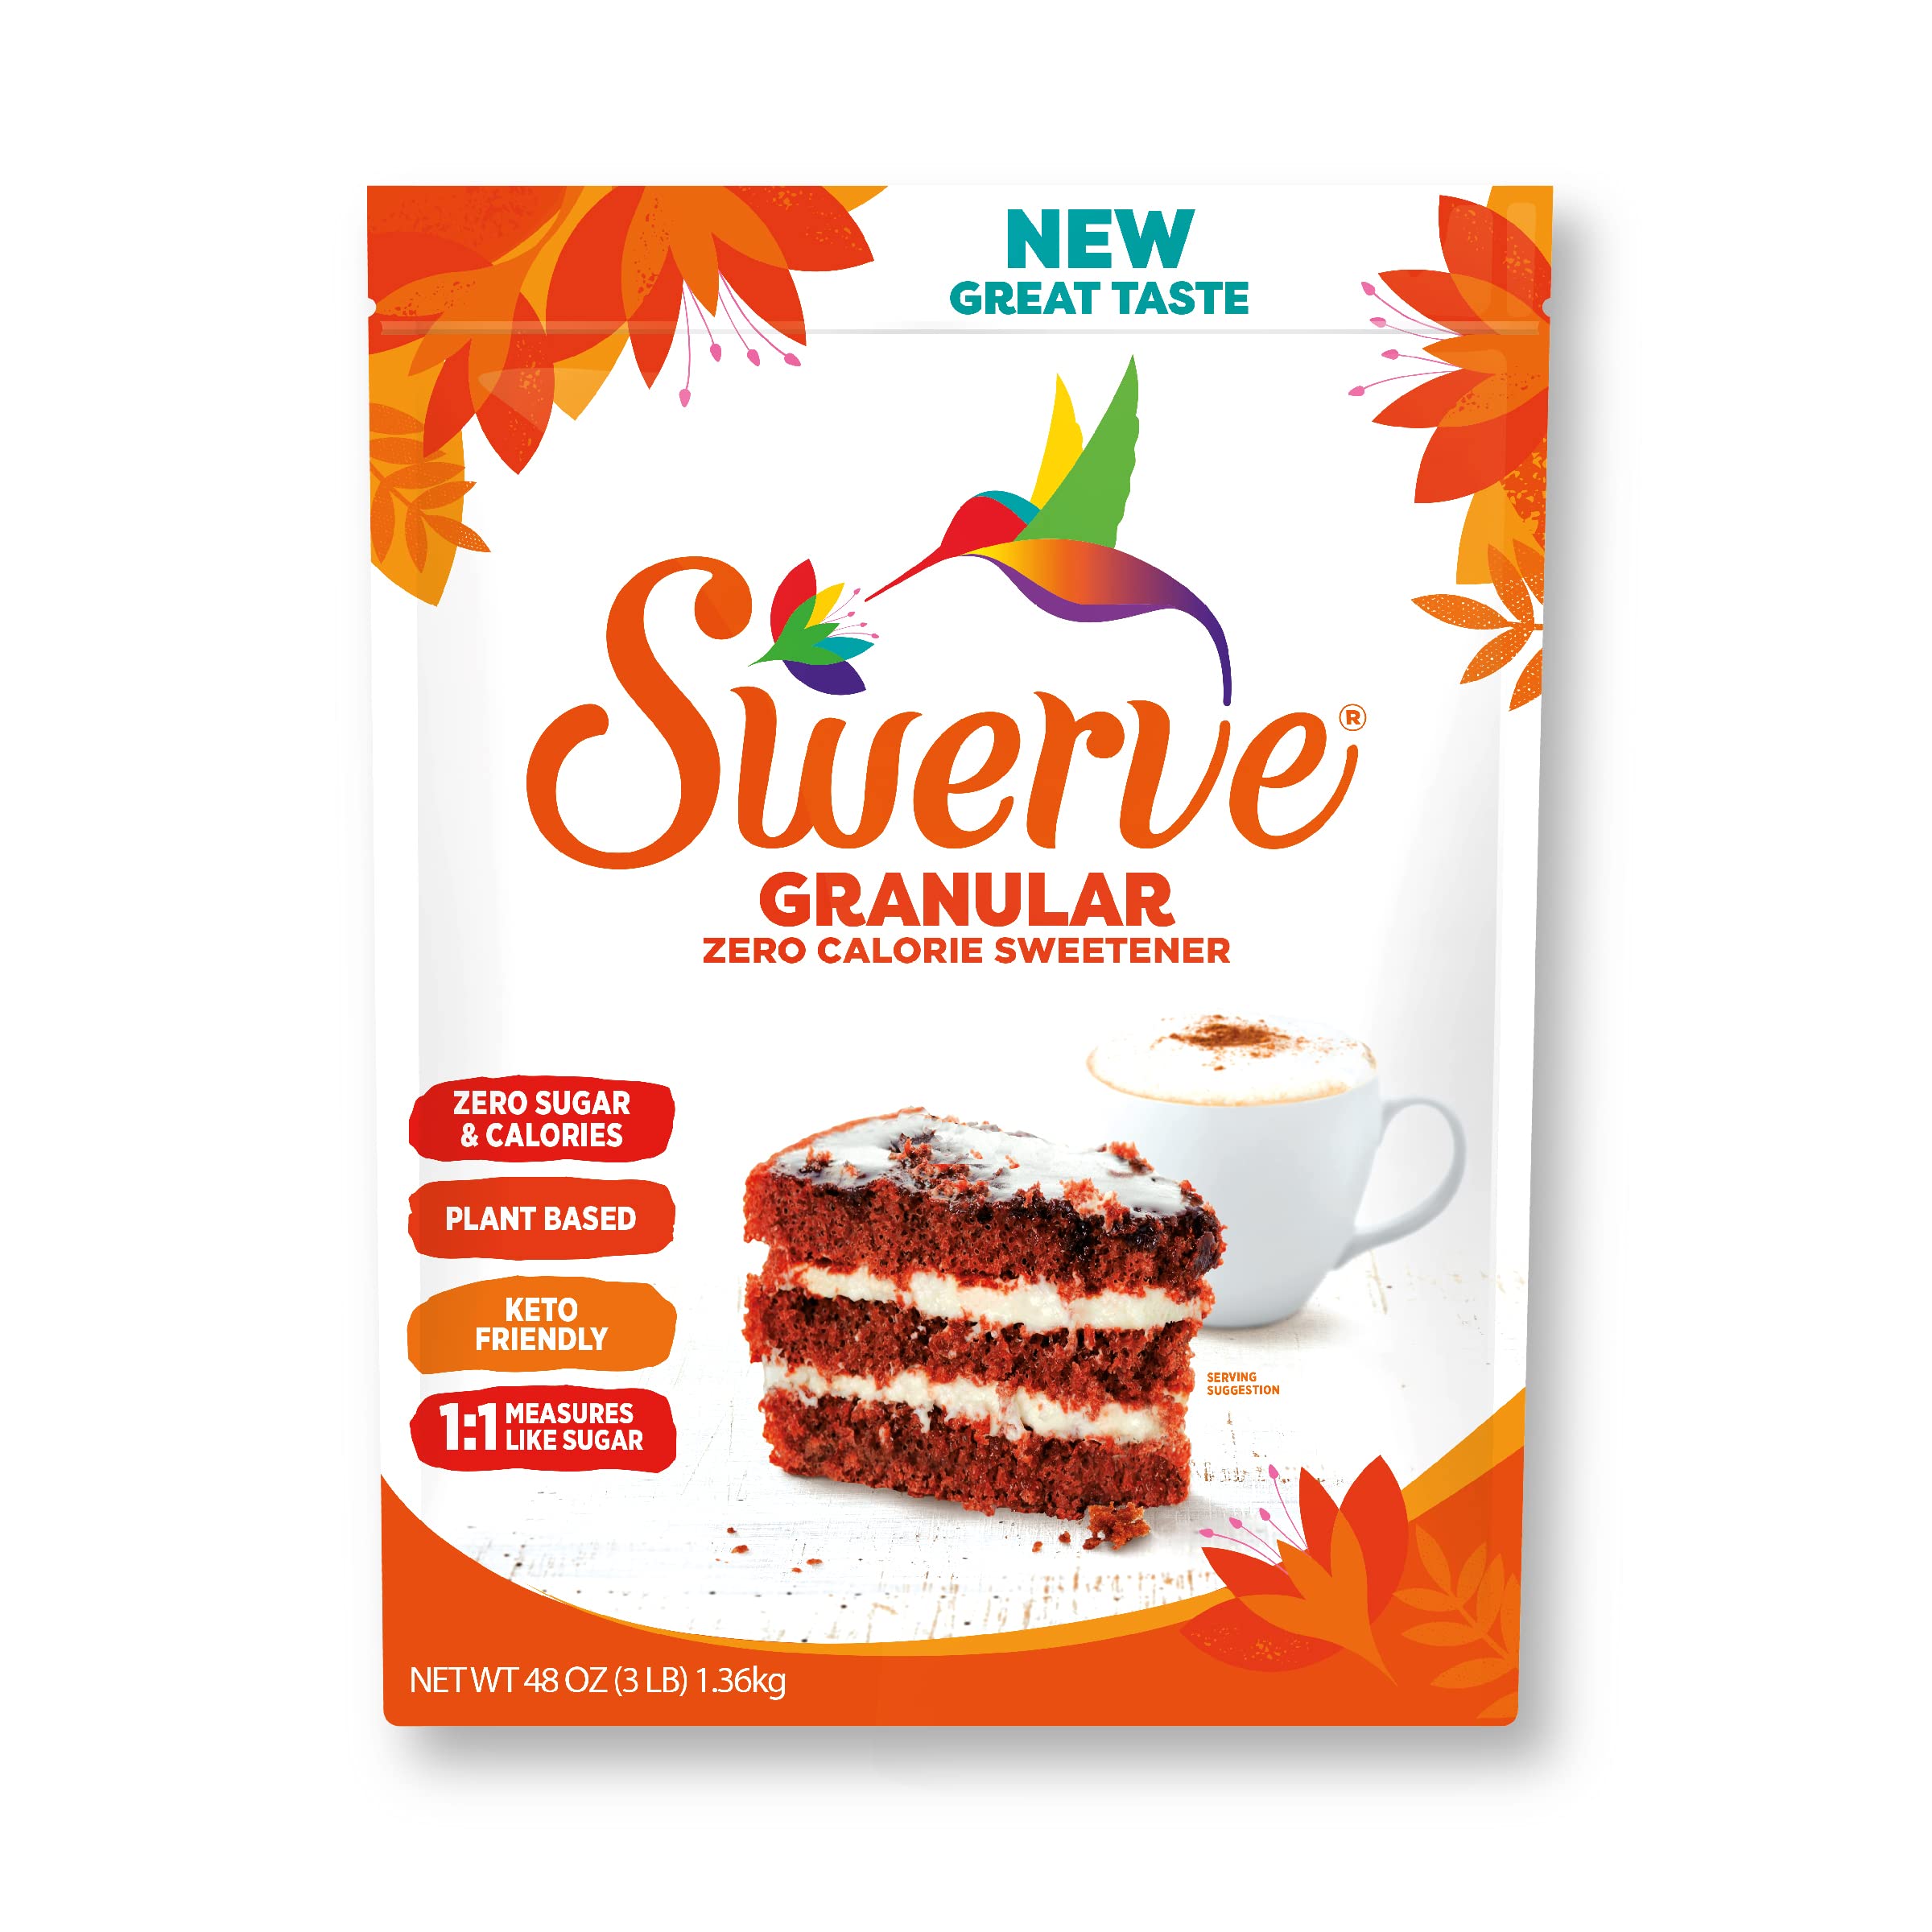 Book Cover Swerve Ultimate Sugar Replacement Sweetener, Granular Sugar Substitute, Zero Calorie, Keto Friendly, Zero Sugar, Non-Glycemic, Gluten Free, 3 lbs Bag(Packaging May Vary)